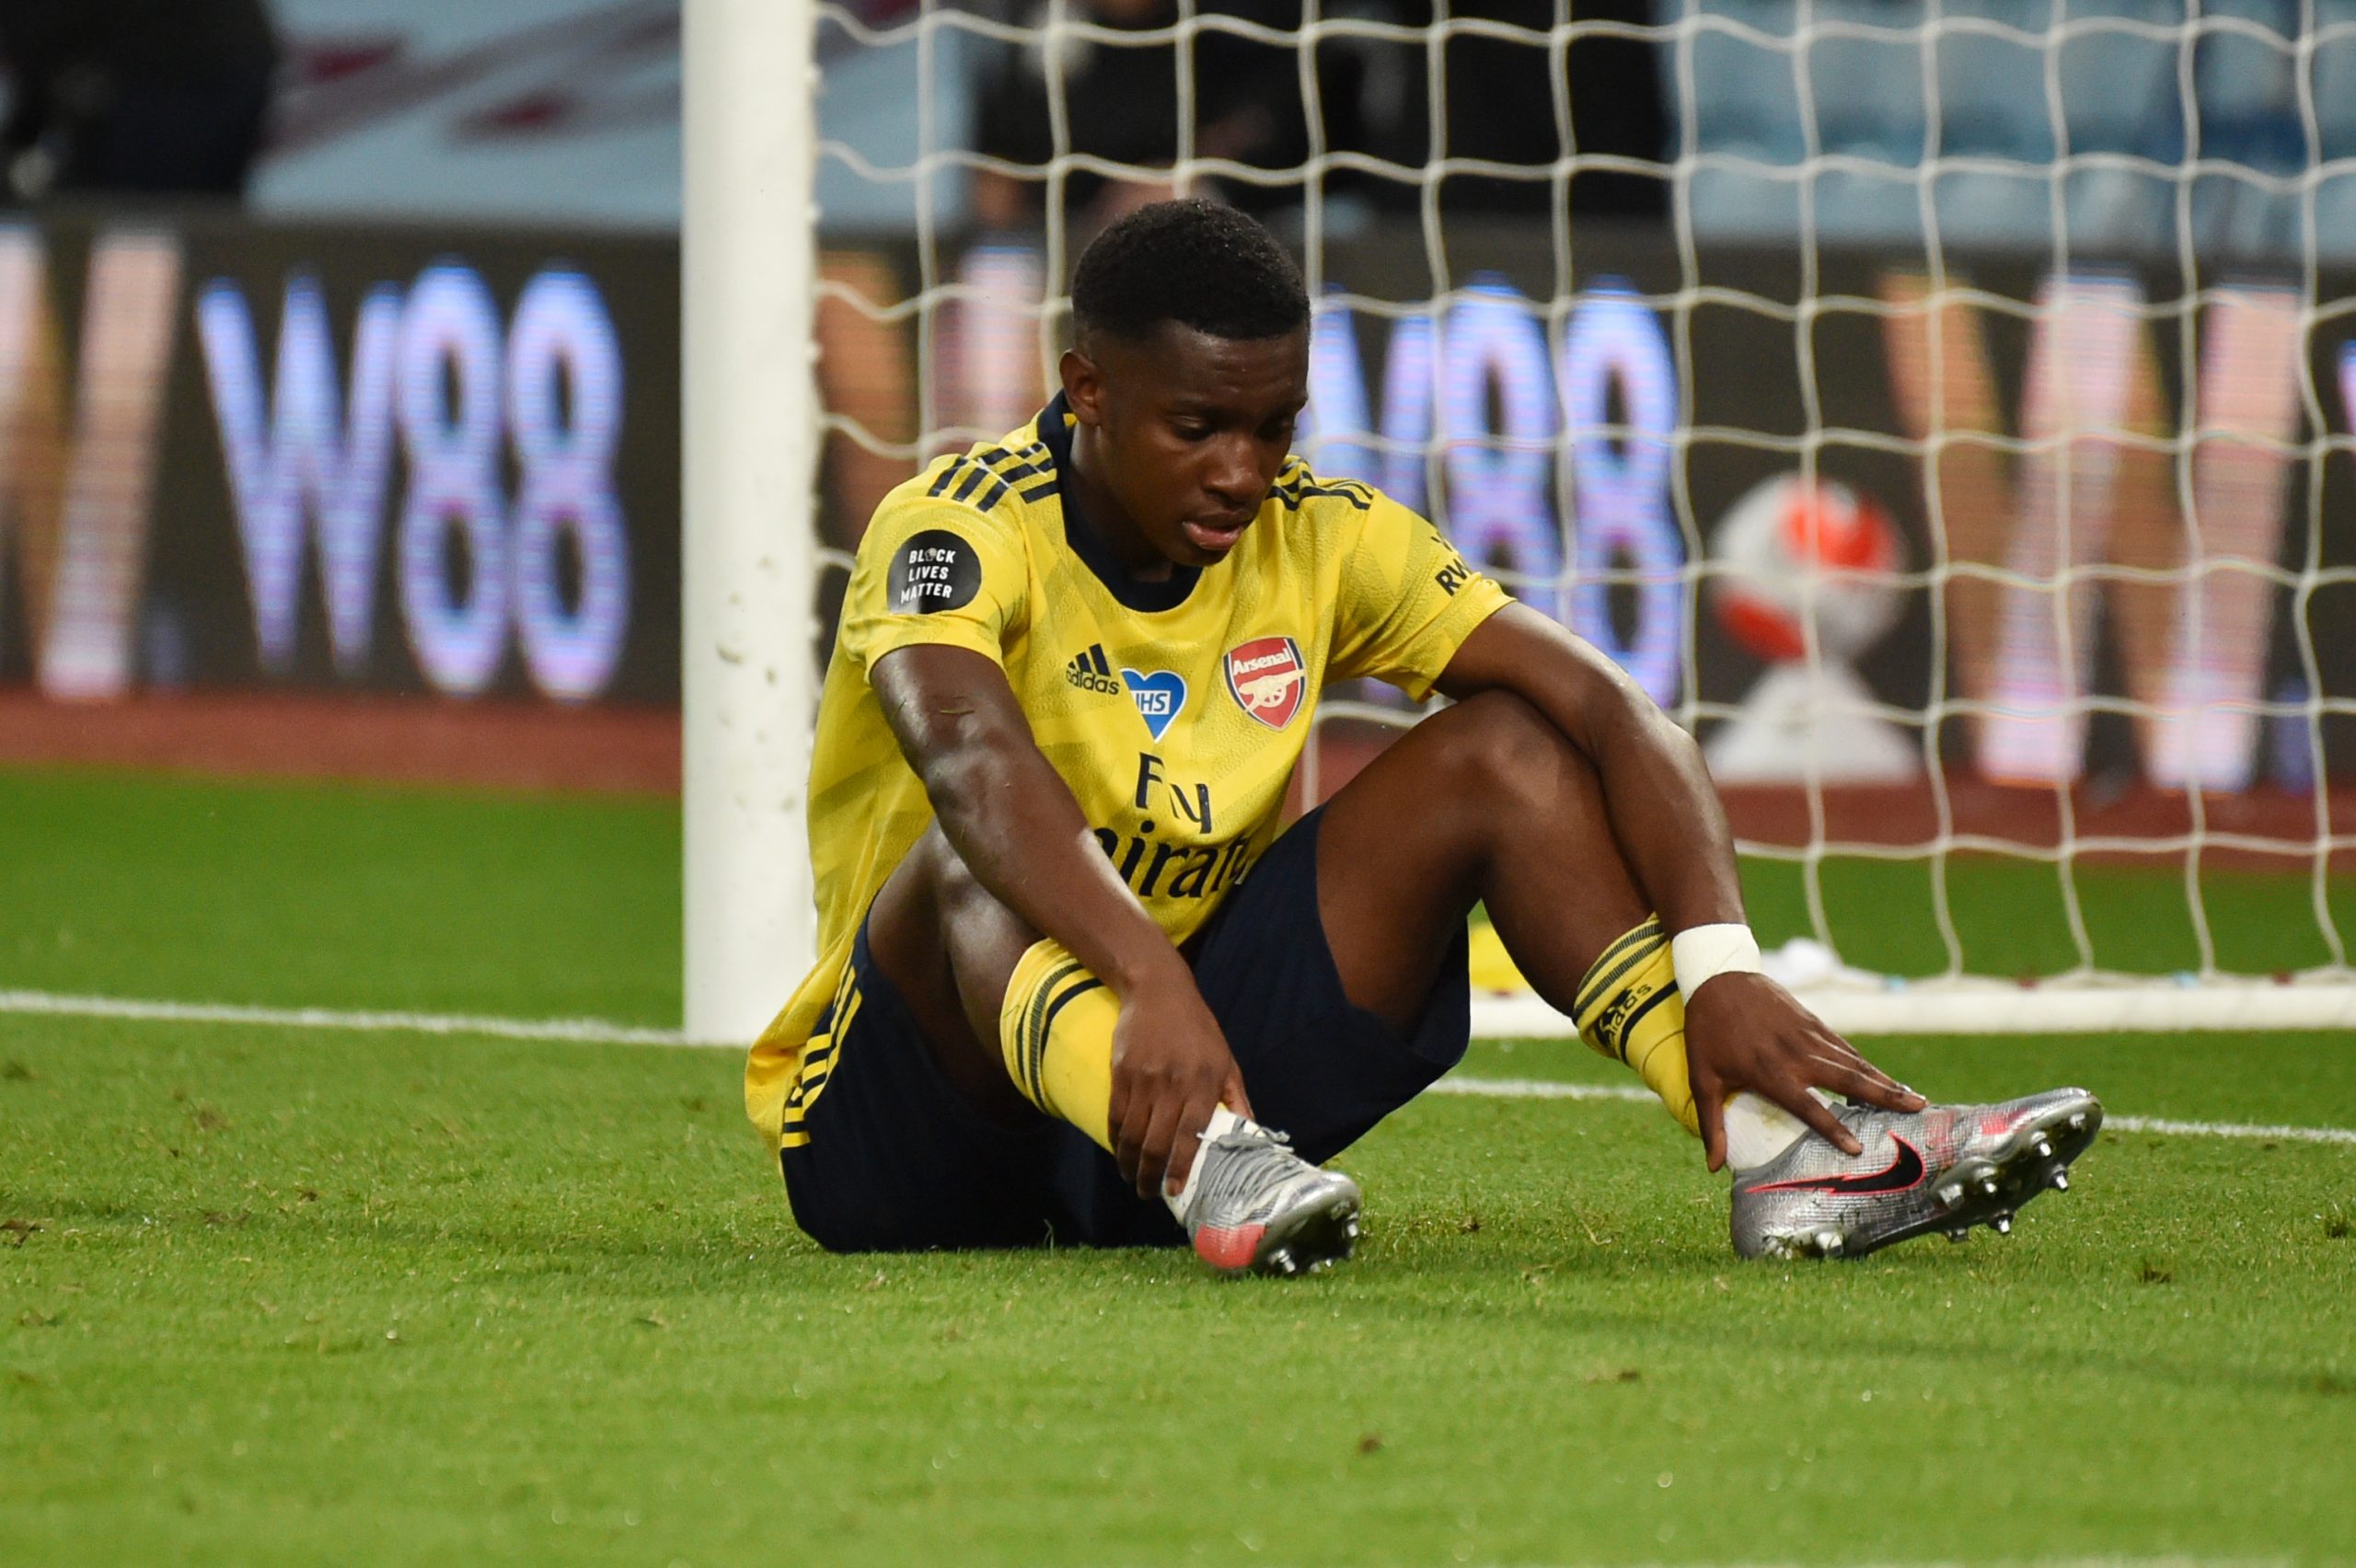 Arsenal Player Ratings Against Aston Villa - Nketiah was unlucky to not score a goal.